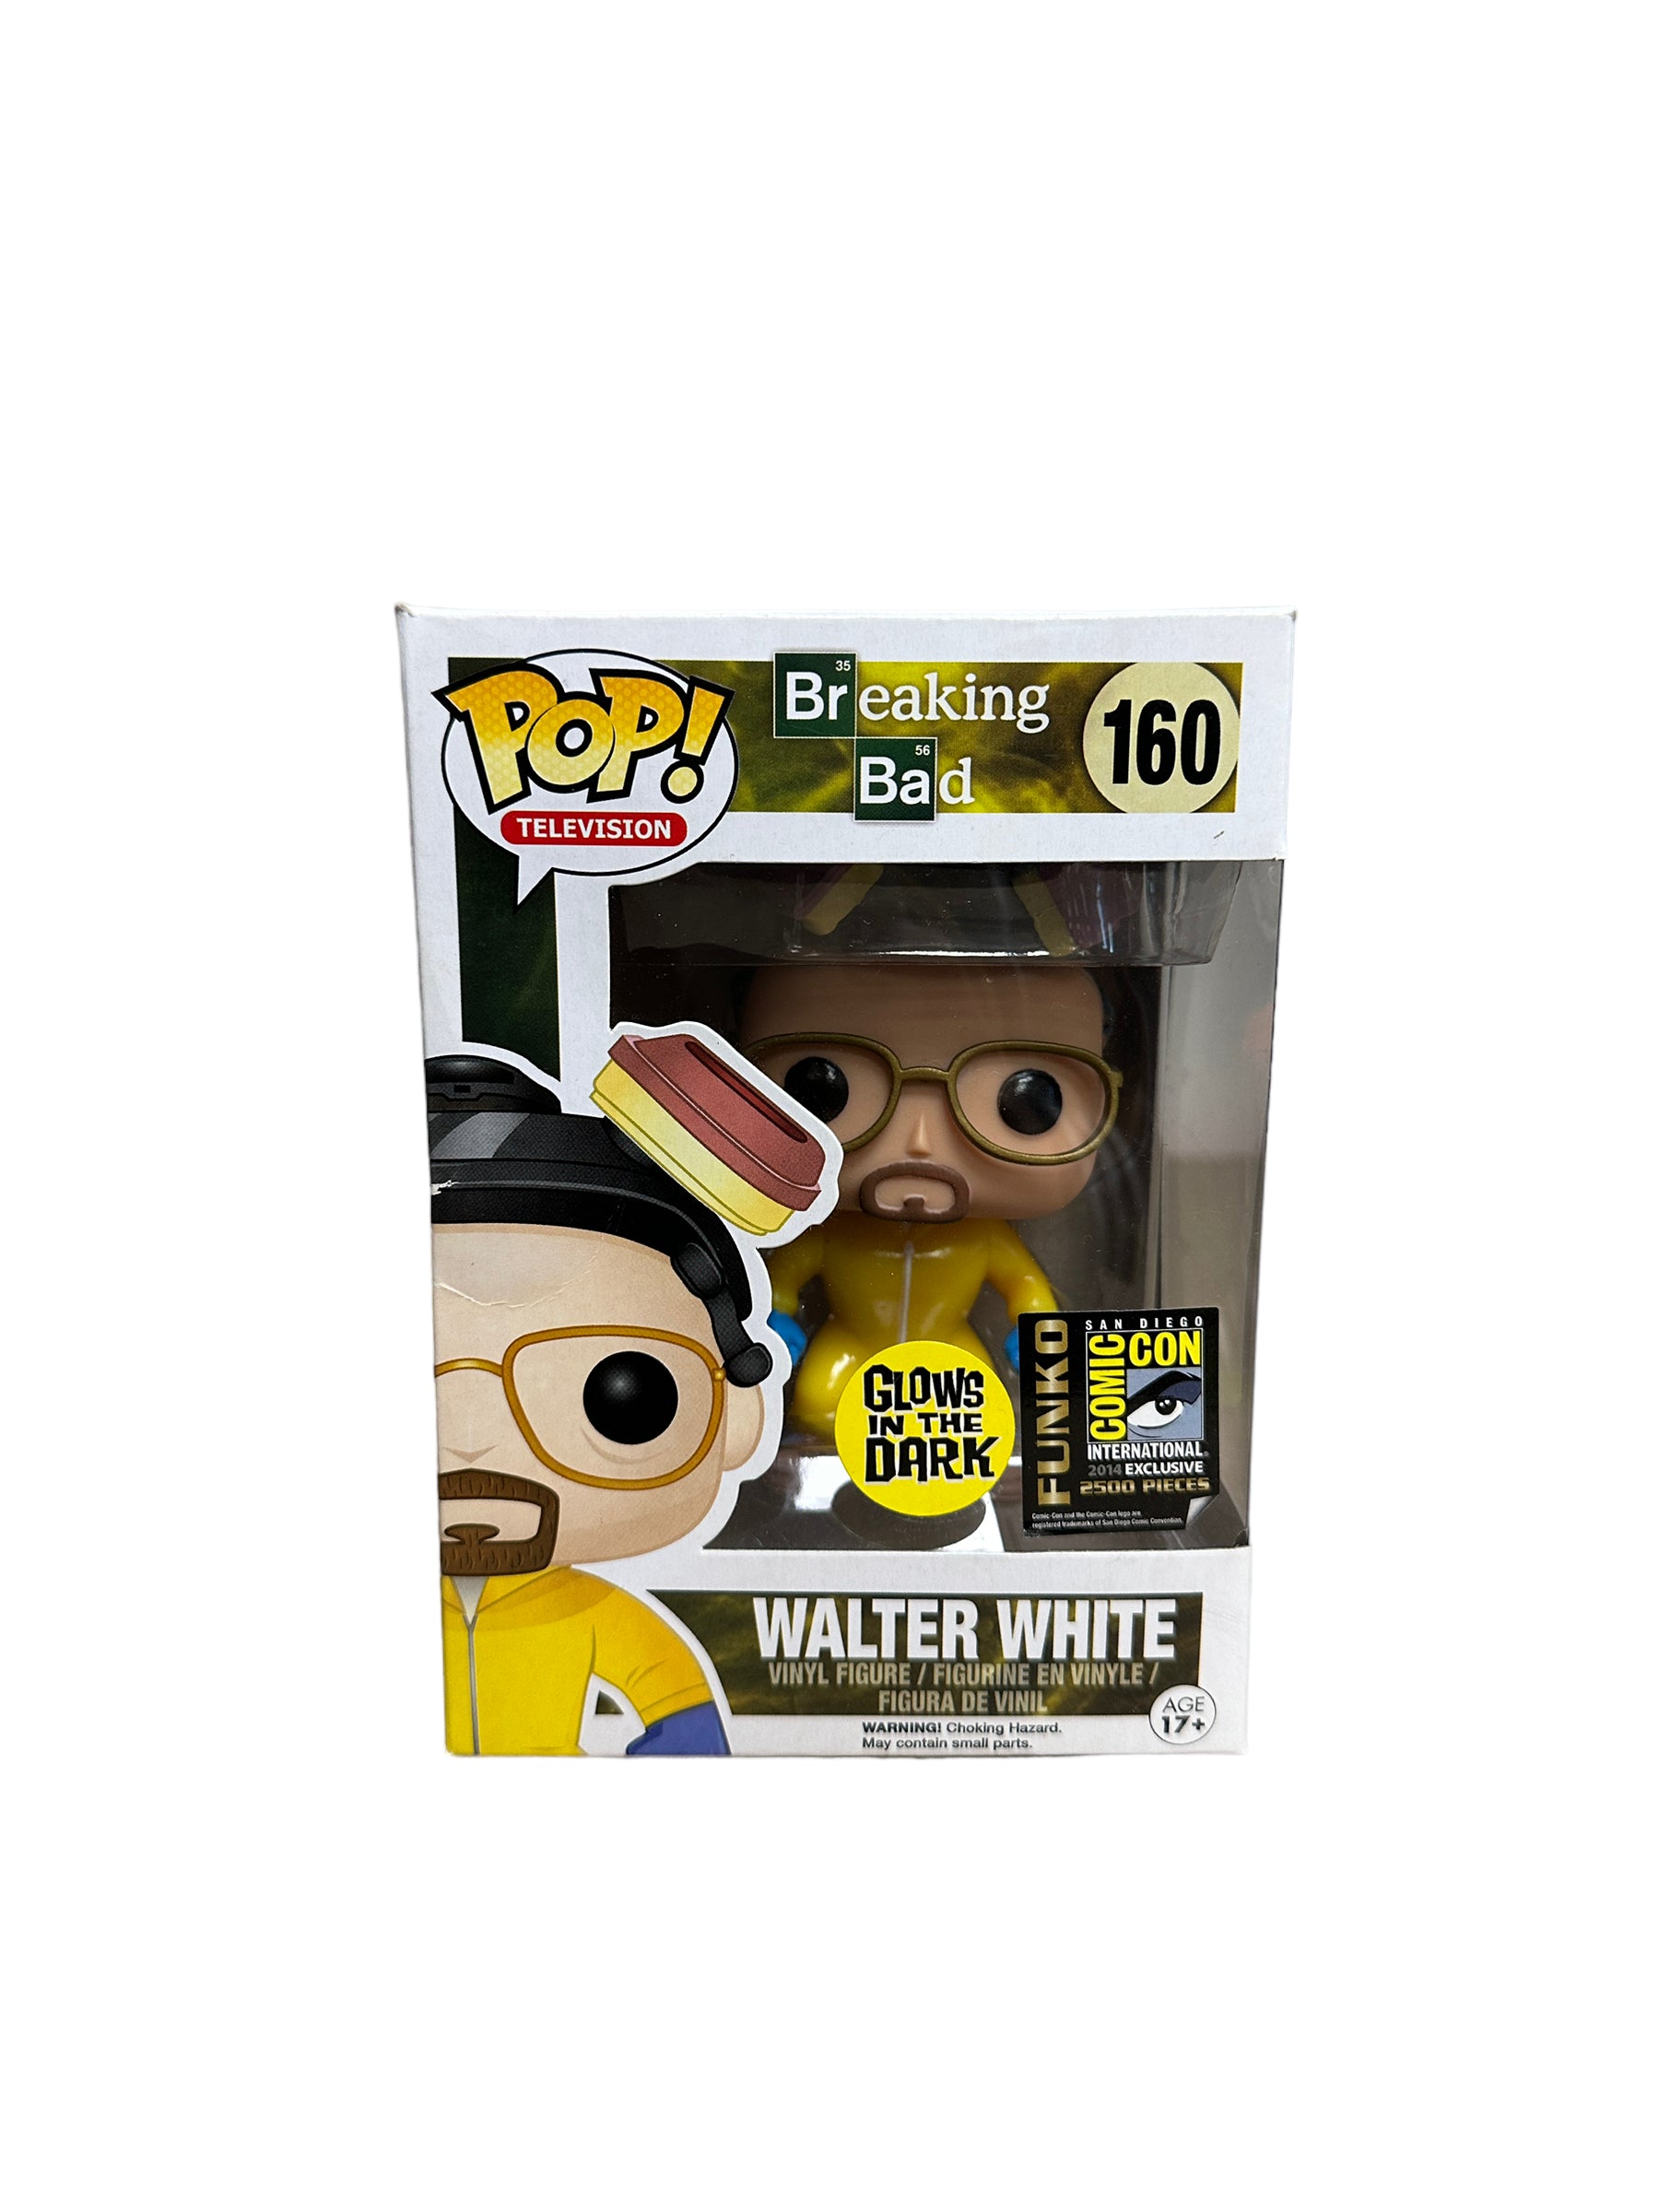 Walter White #160 (Glows in the Dark) Funko Pop! - Breaking Bad - SDCC 2014 Exclusive LE2500 Pcs - Condition 7/10